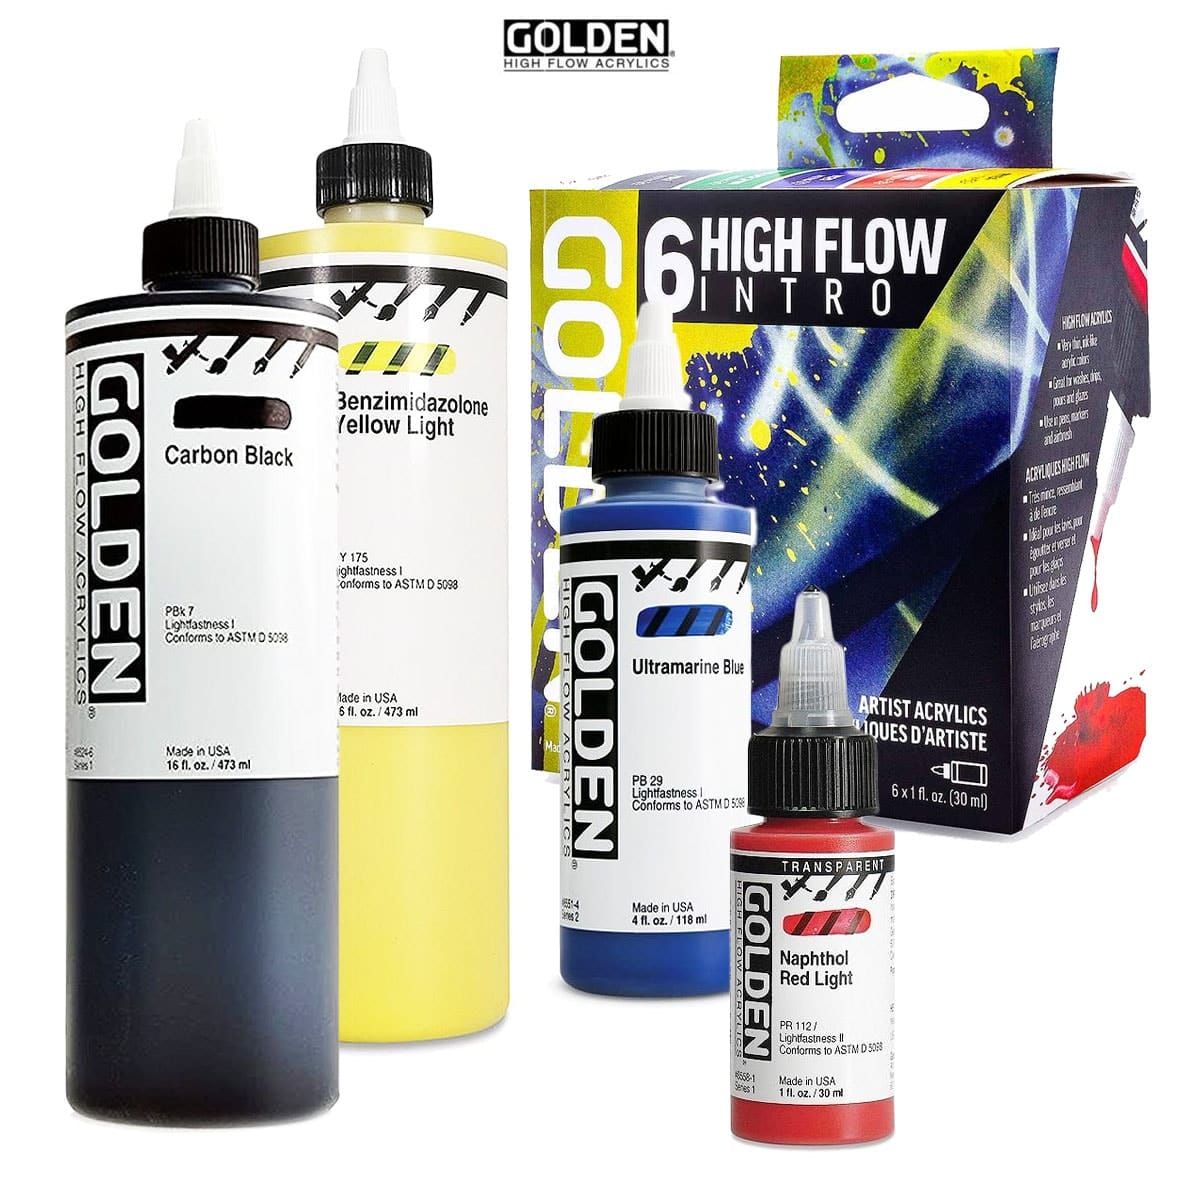 High Flow Artist Acrylic Paints and Sets